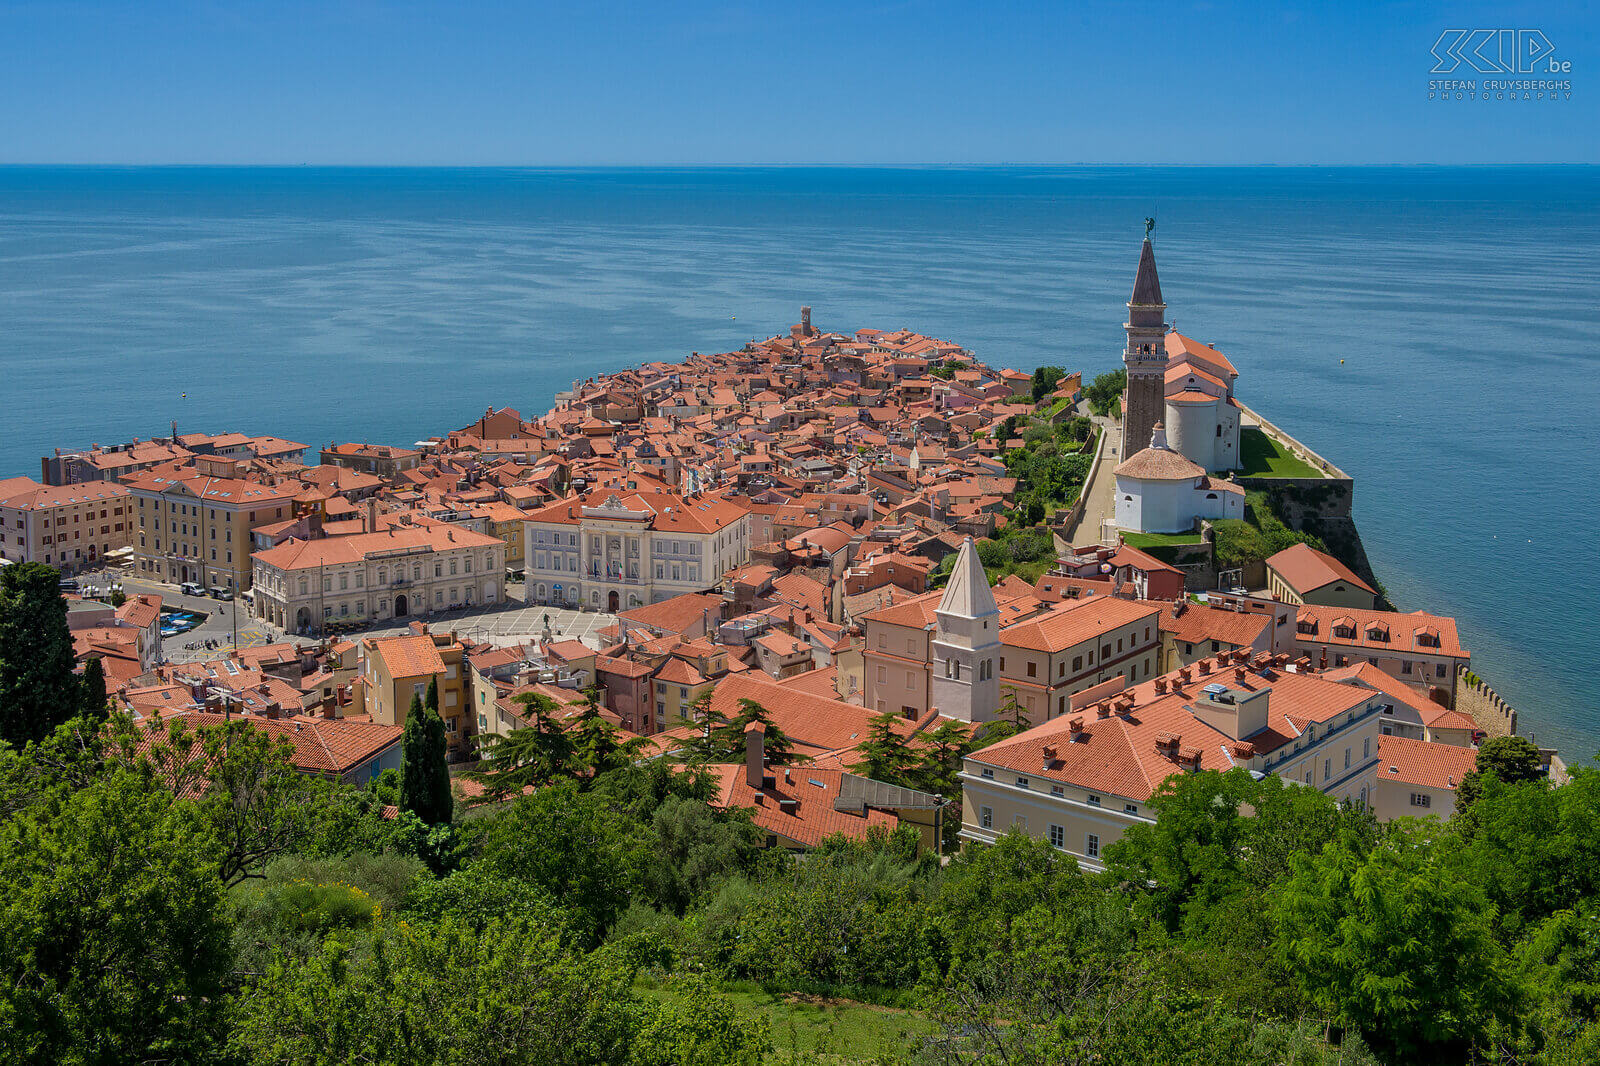 Piran - View from old city walls From the old city walls of Piran you have a beautiful view of the city Stefan Cruysberghs